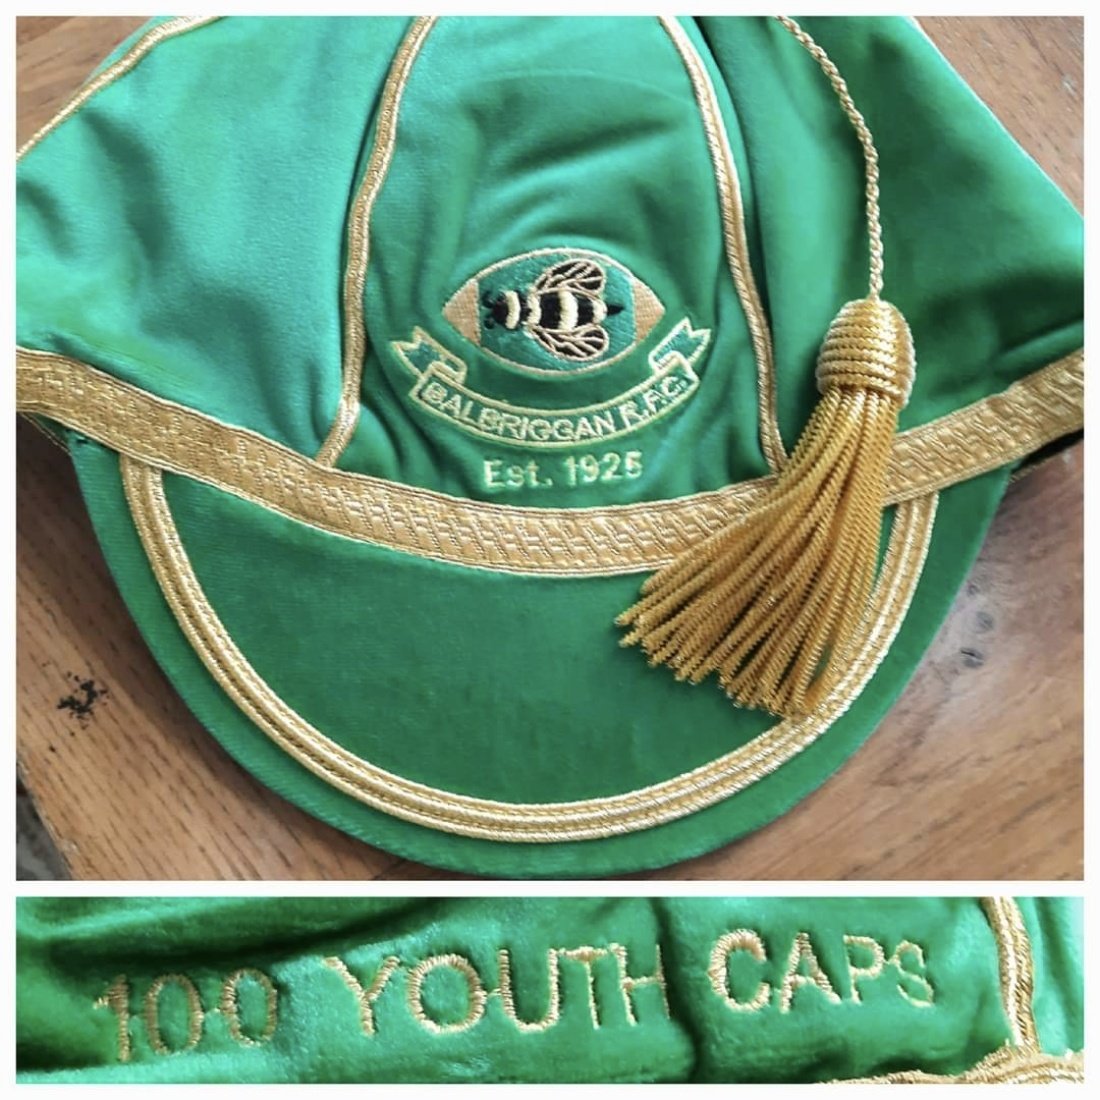 To play 100 Youth games is a massive achievement and to do so when one season was missed due to Covid makes it even more incredible. But that's exactly what Jimmy, Daragh, and Oisin did. The club has recognised this achievement by awarding the first ever '100 Youth Caps' cap.